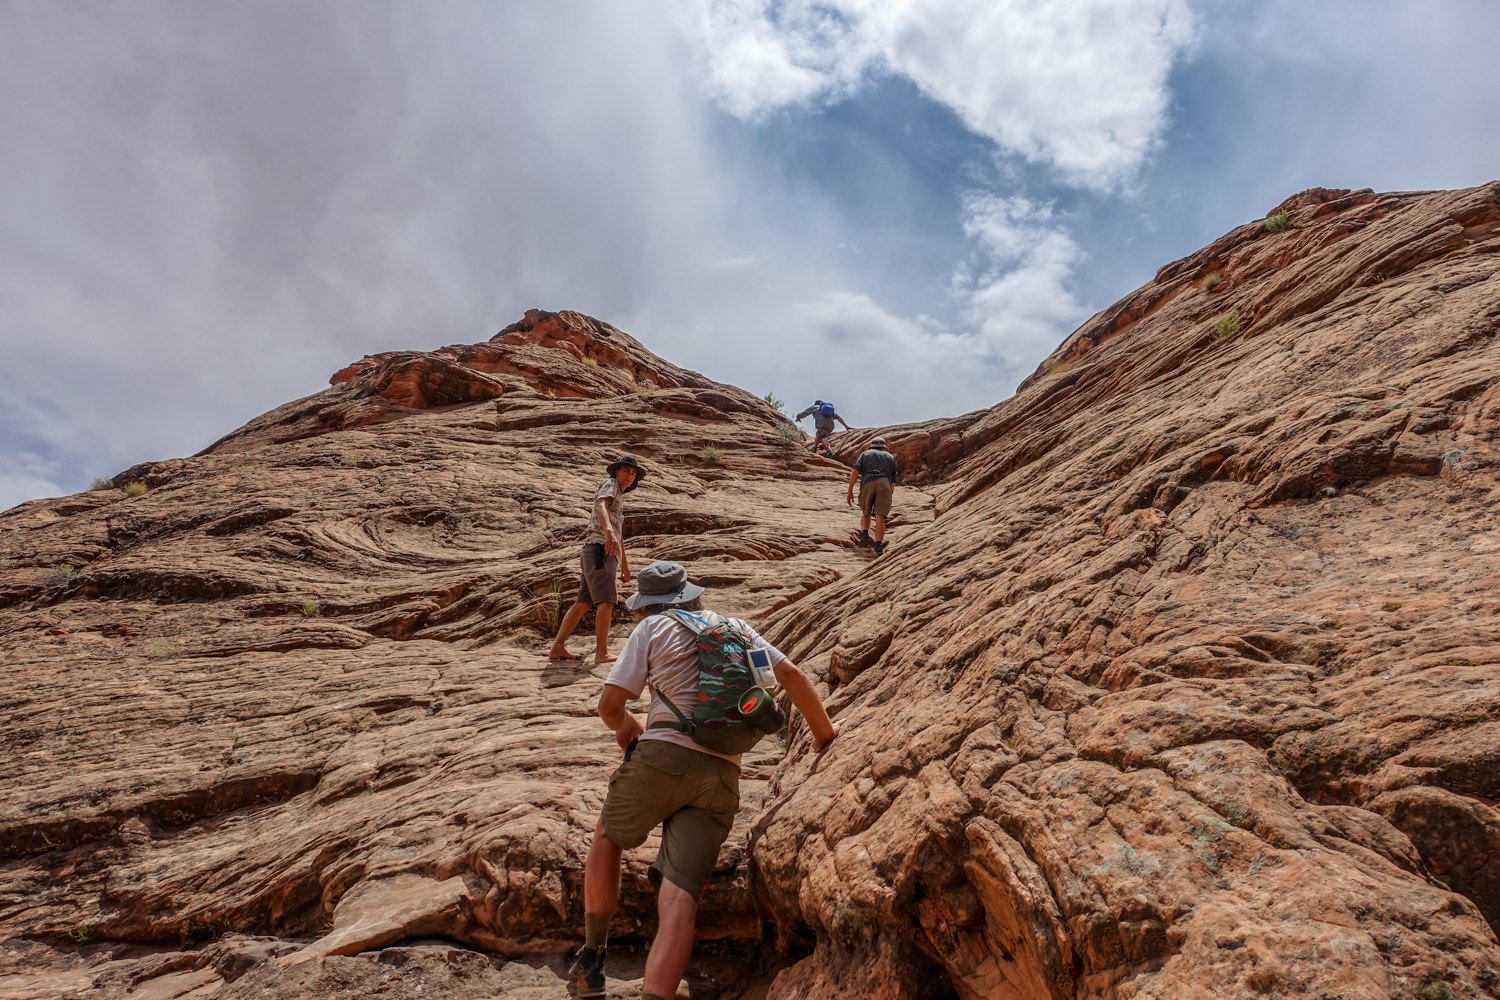 Day hikers scrambling up a rocky face near Coyote Gulch